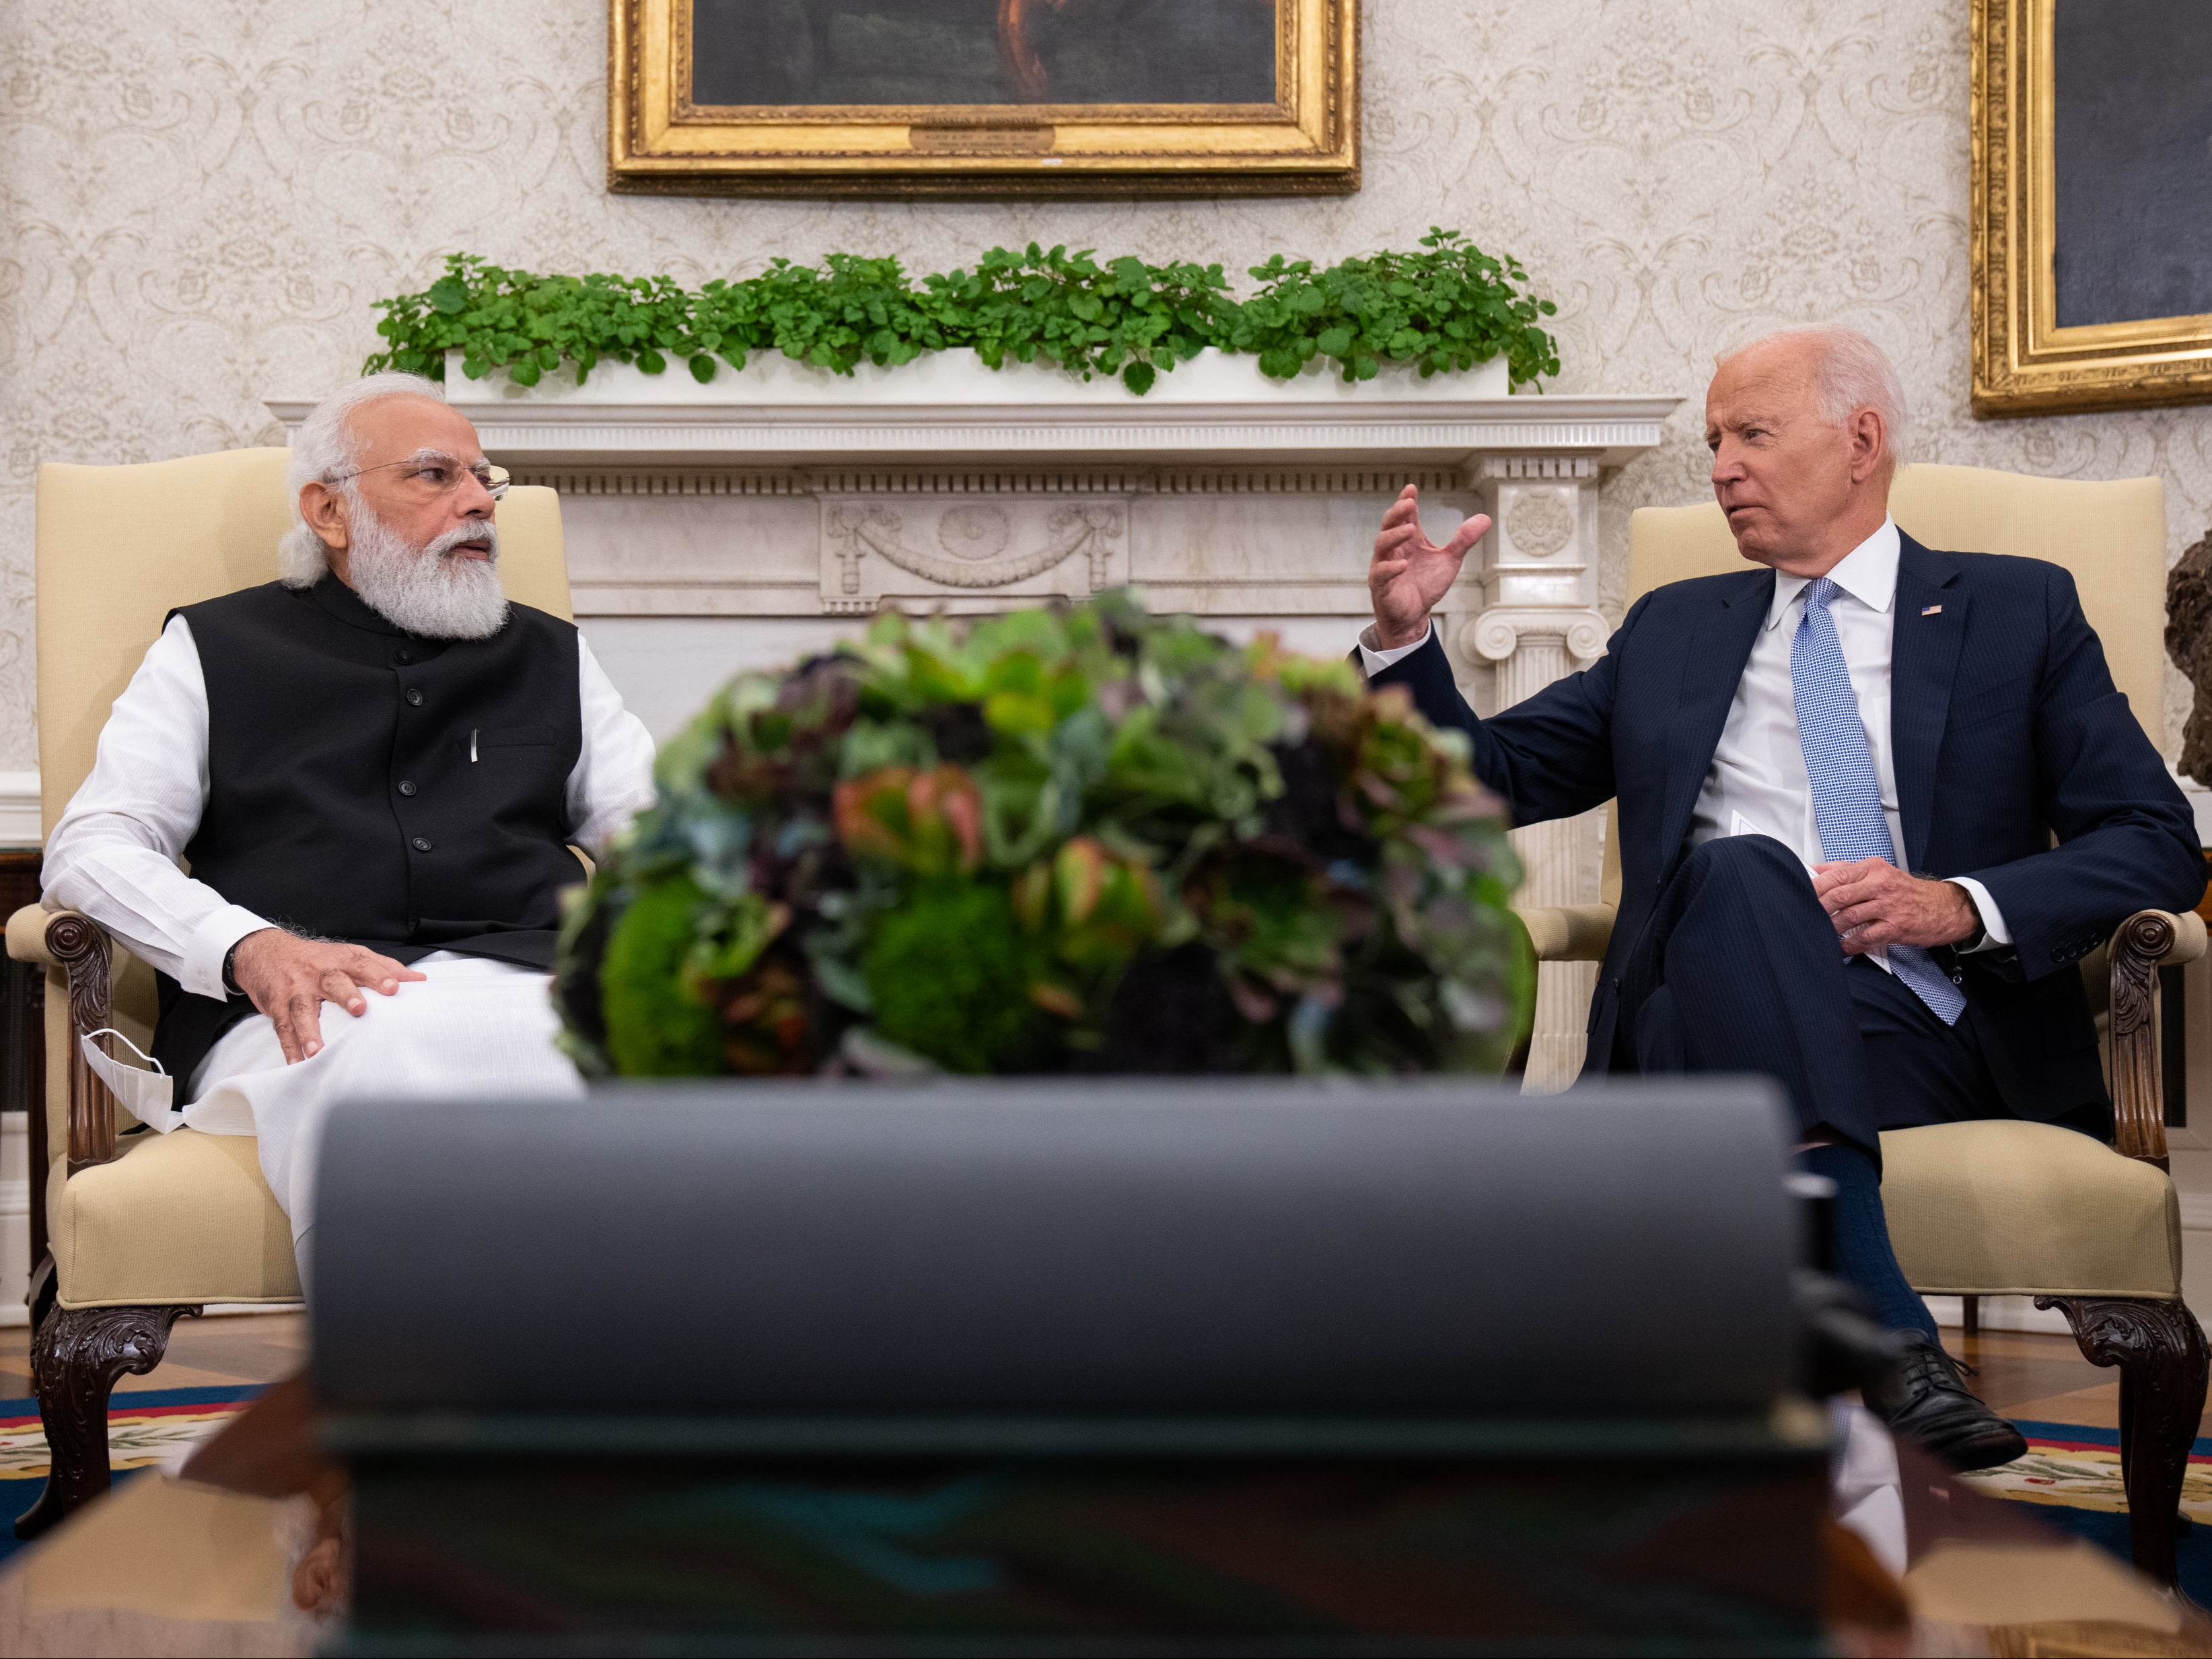 File image: India has been a long-term partner for the US in South Asia, however, the position of the two countries on the Ukraine crisis remains at odds